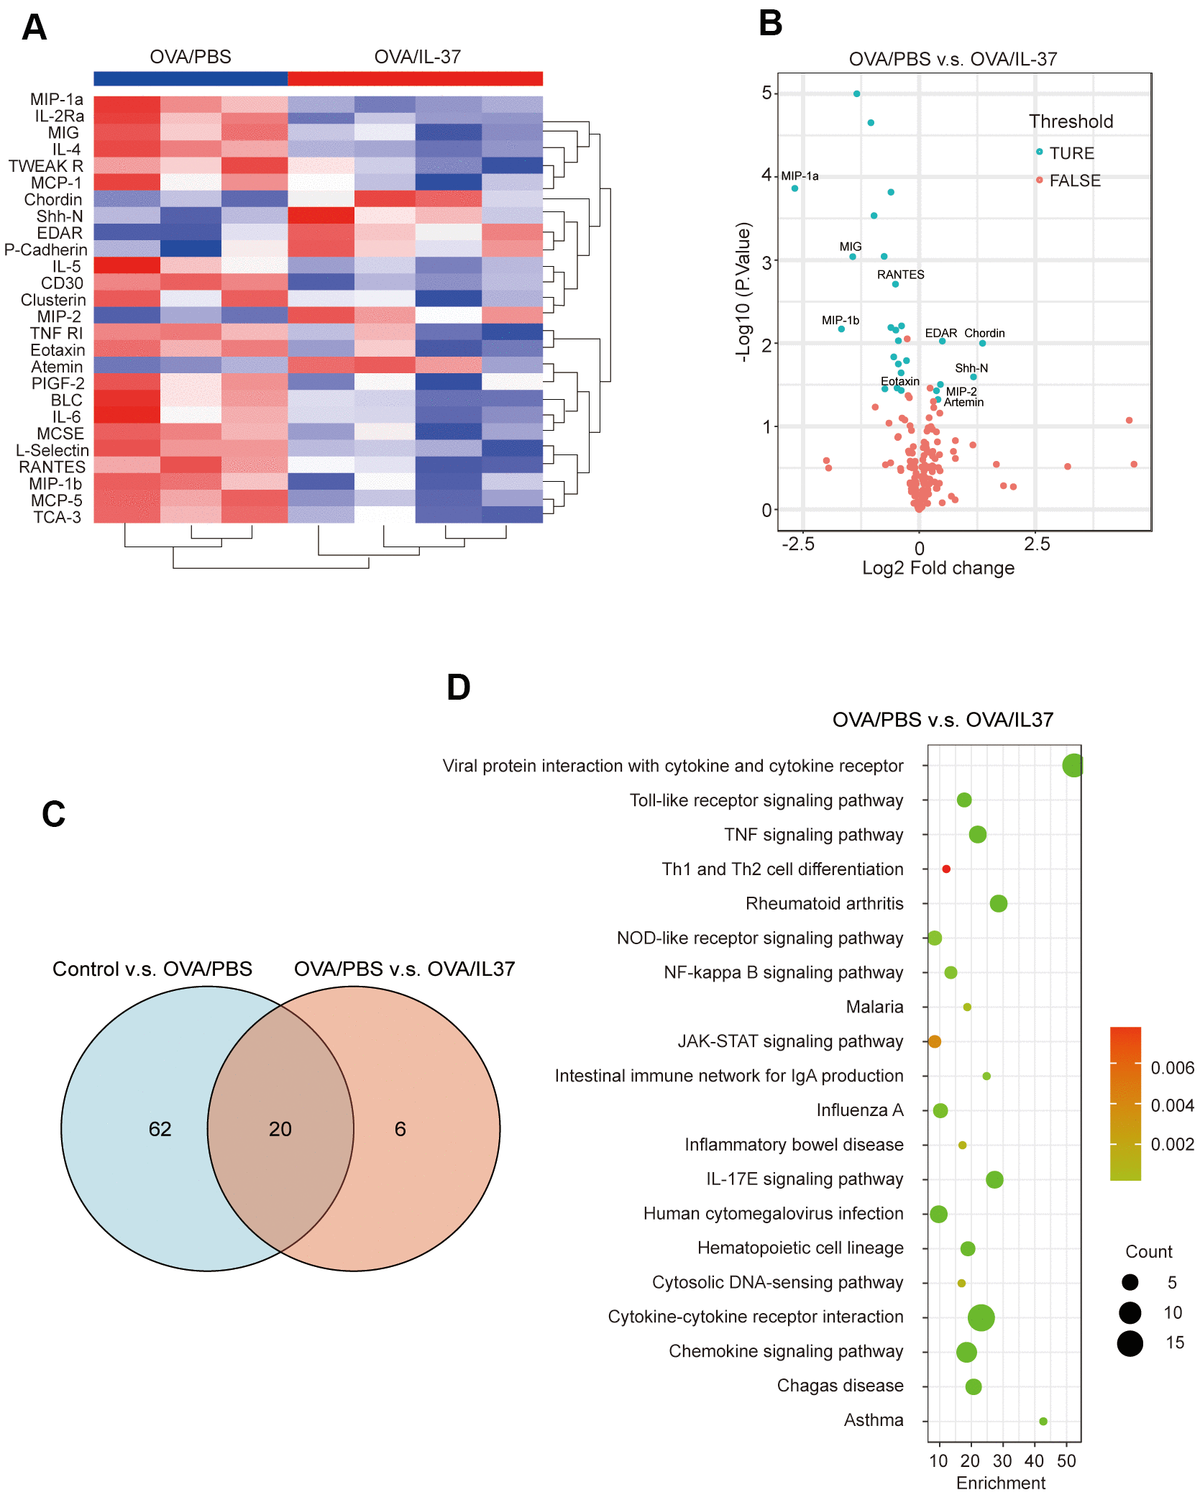 Visualization of cytokine antibody array analysis. (A) Clustering heatmap. Red represents OVA/IL-37 group, blue represents OVA/PBS group. (B) Volcano plot shows 26 differentially expressed proteins (DEPs)(blue dot) between OVA/PBS and OVA/IL-37, which are defined as those with adjust p value(adj.P.Val) less than 0.05 and foldchange over 1.2 or less than 0.83(absolute LogFC>0.263). Top 10 DEPs have been marked on the picture. (C) There are 20 DEPs result from intersection of Control v.s. OVA/PBS and OVA/PBS v.s. OVA/IL-37. (D) Protein function annotation KEGG pathway (OVA/PBS v.s. OVA/IL-37).